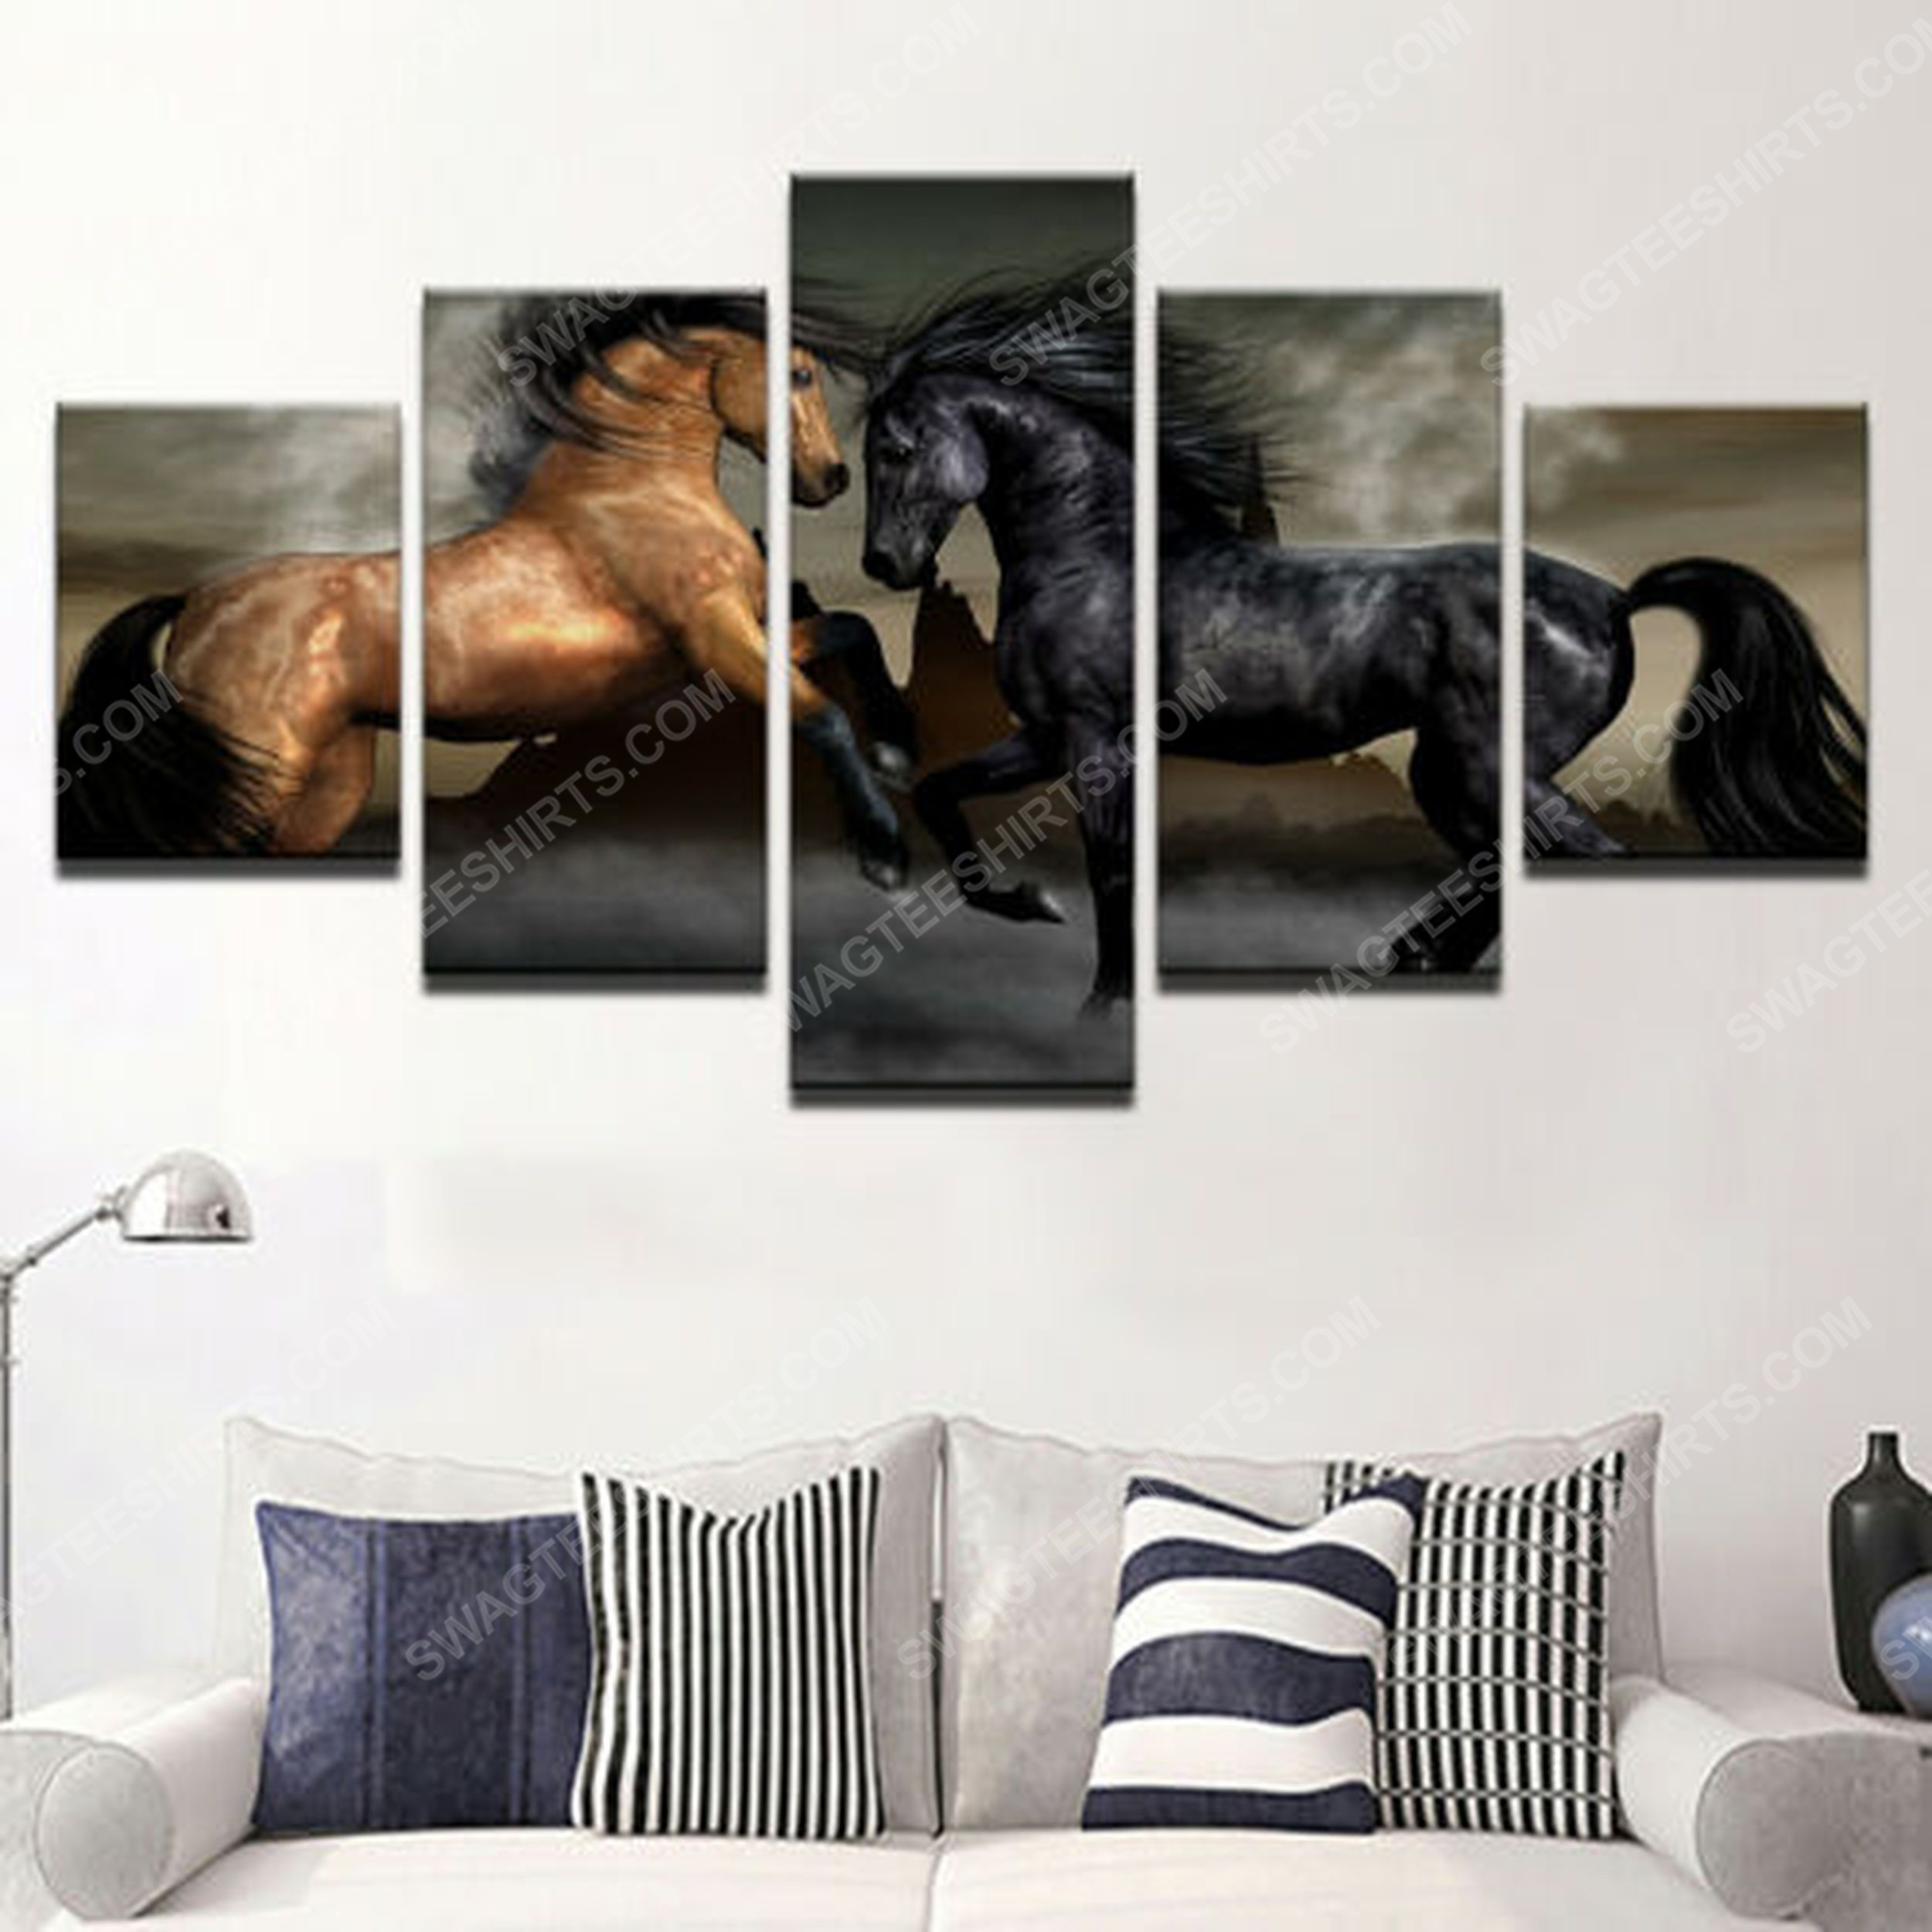 Horses black and brown canvas wall art home decor